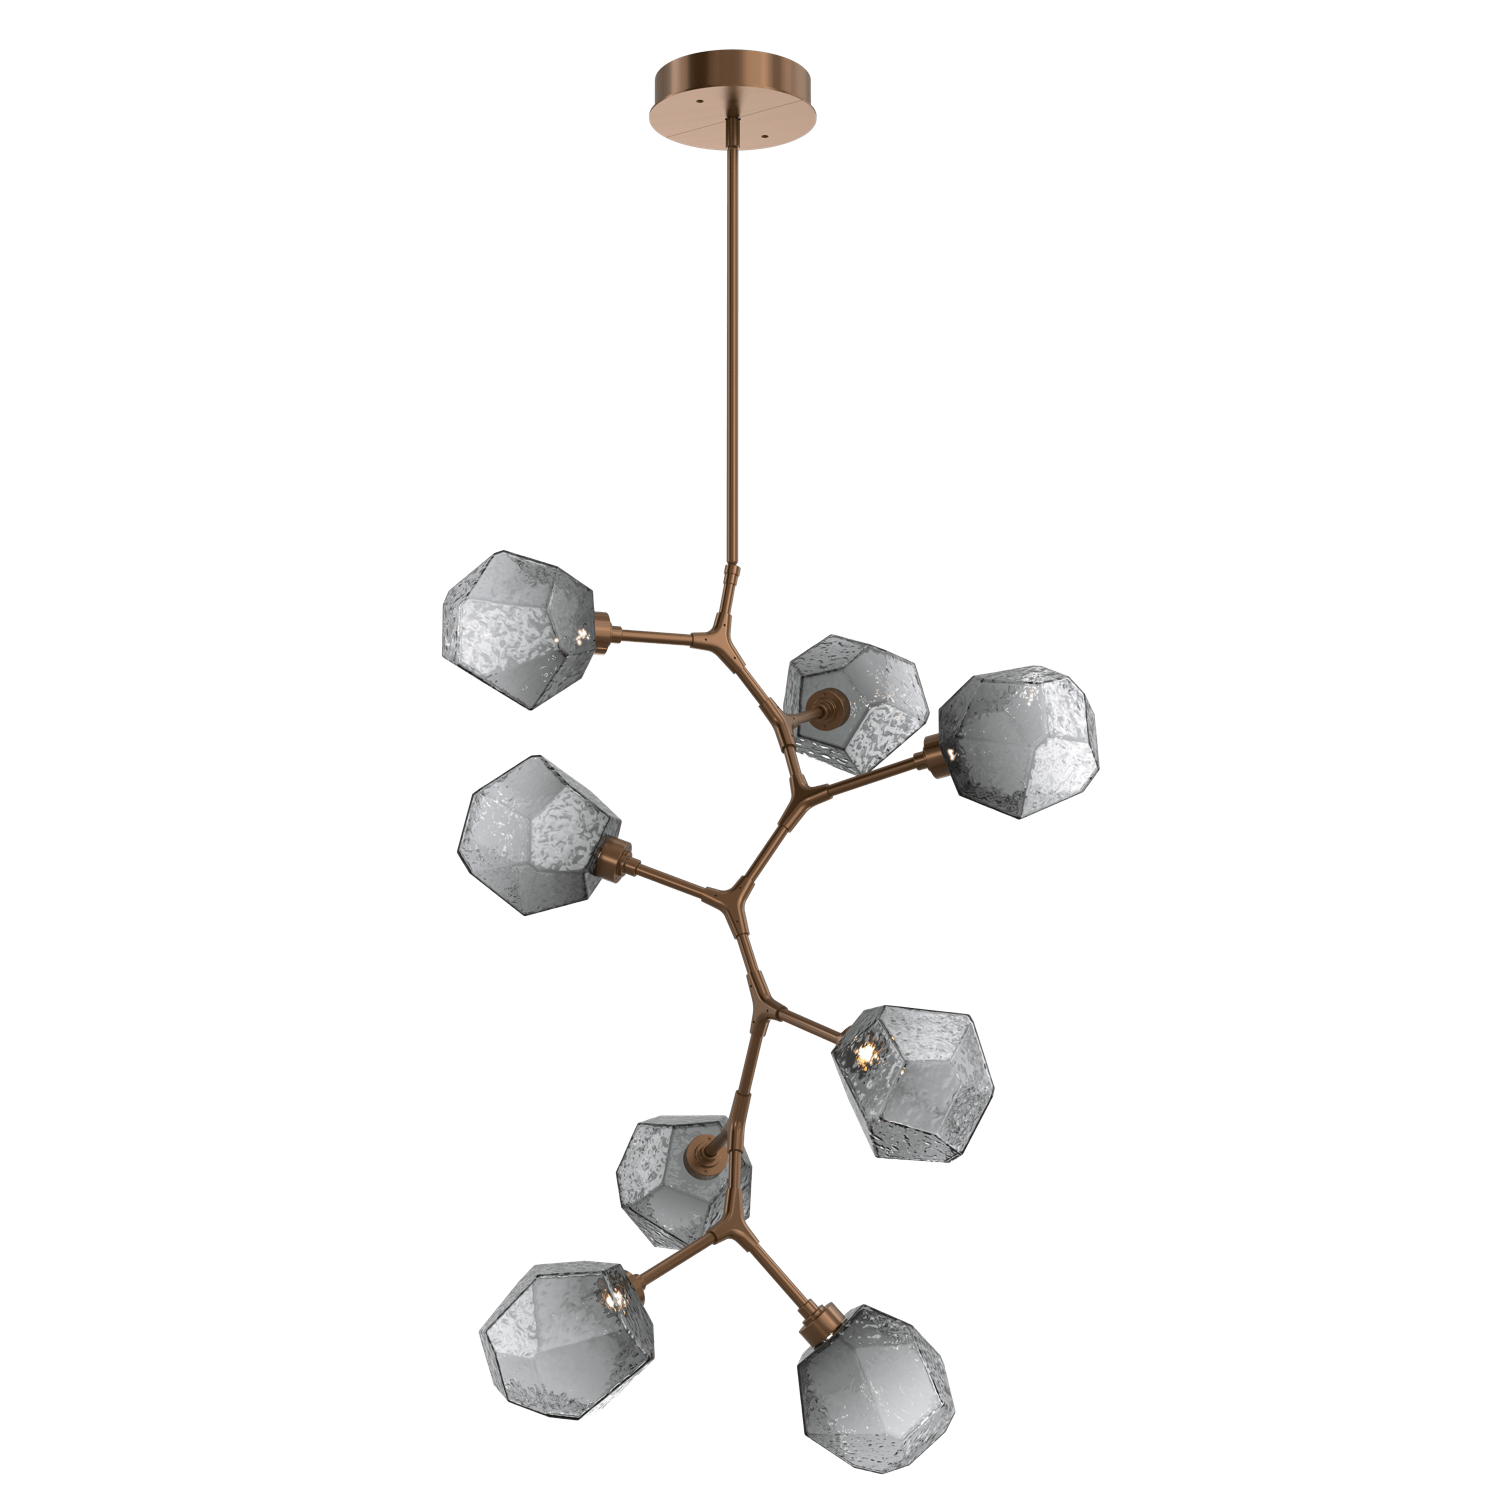 CHB0039-VB-RB-S-Hammerton-Studio-Gem-8-light-modern-vine-chandelier-with-oil-rubbed-bronze-finish-and-smoke-blown-glass-shades-and-LED-lamping